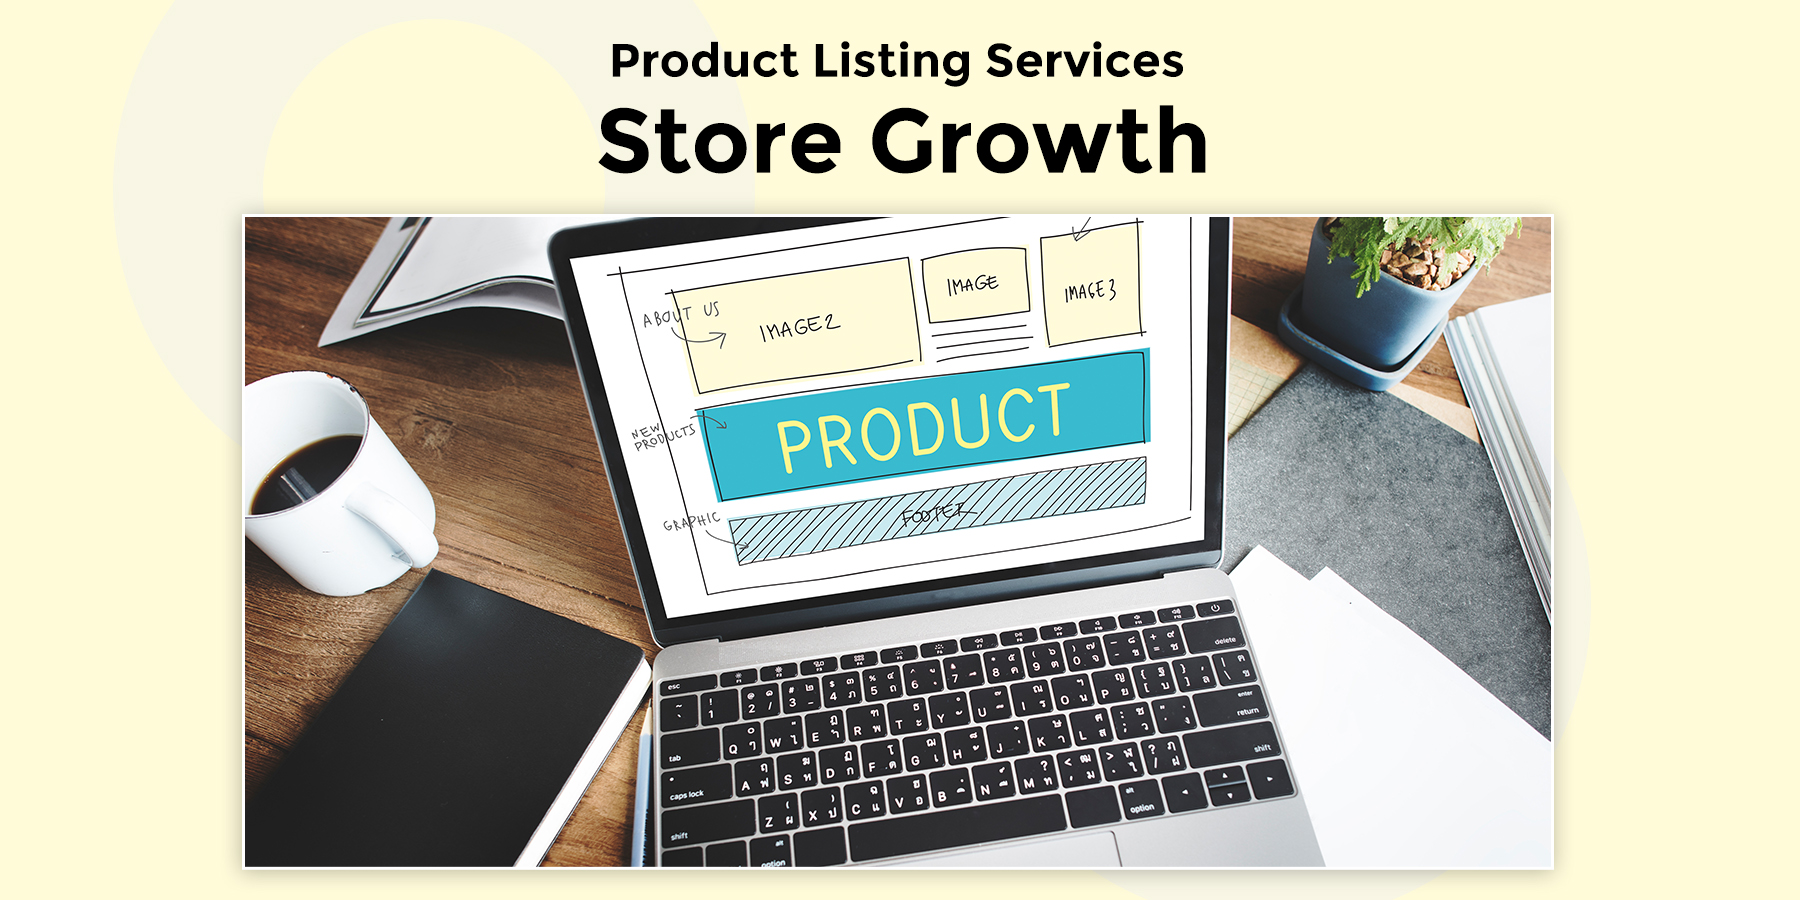 How Can Ecommerce Product Listing Services Help You Grow Your Amazon Store